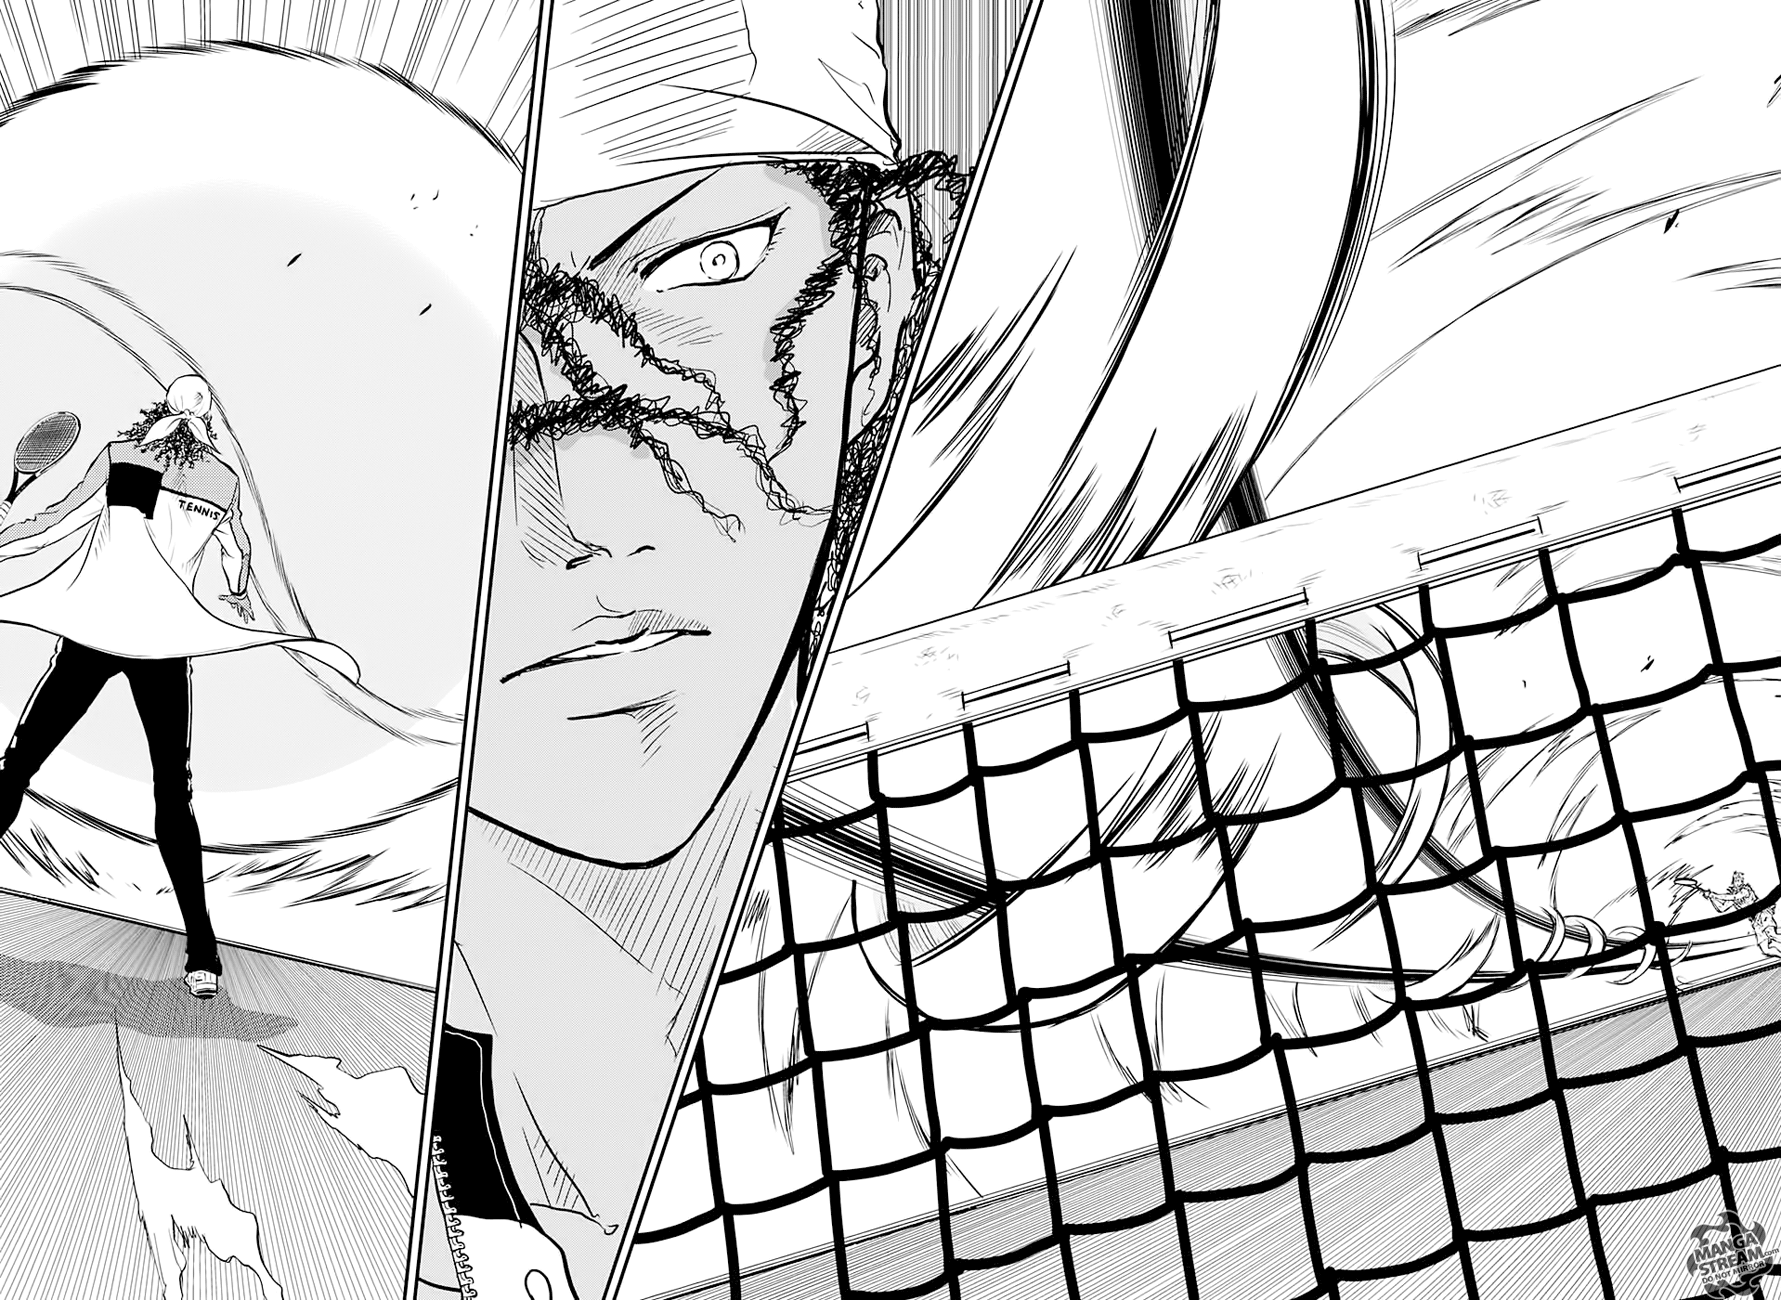 New Prince of Tennis Chapter 220